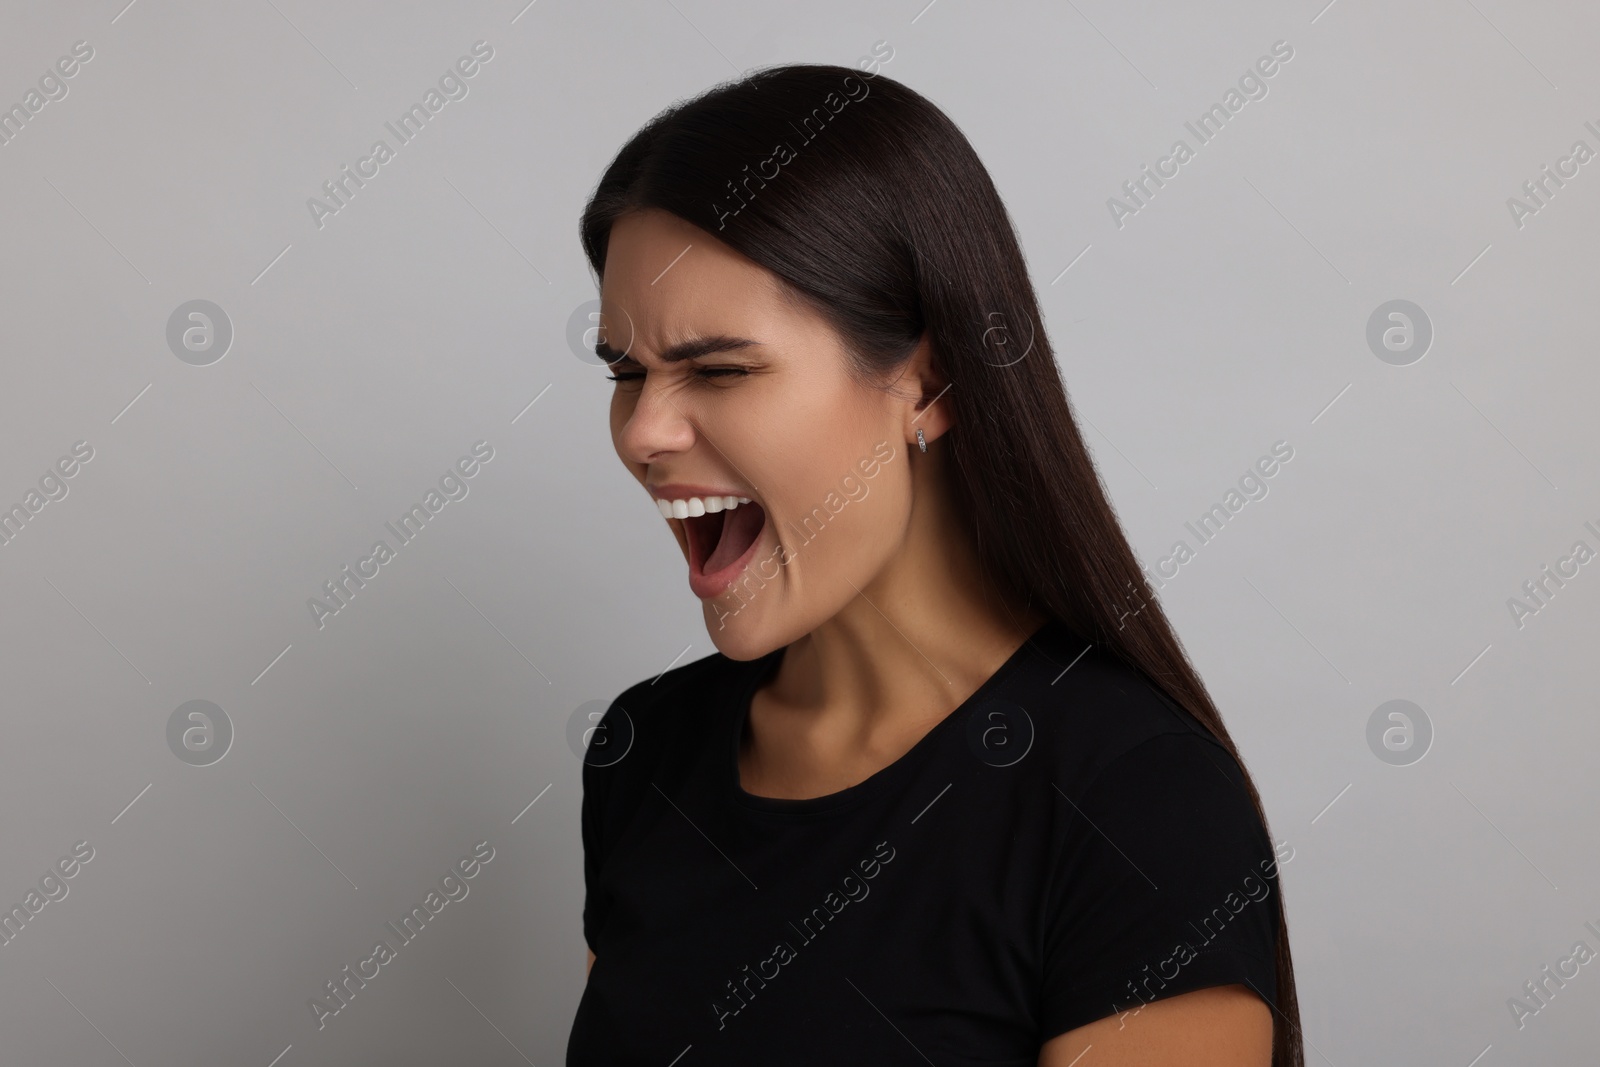 Photo of Personality concept. Emotional woman on grey background